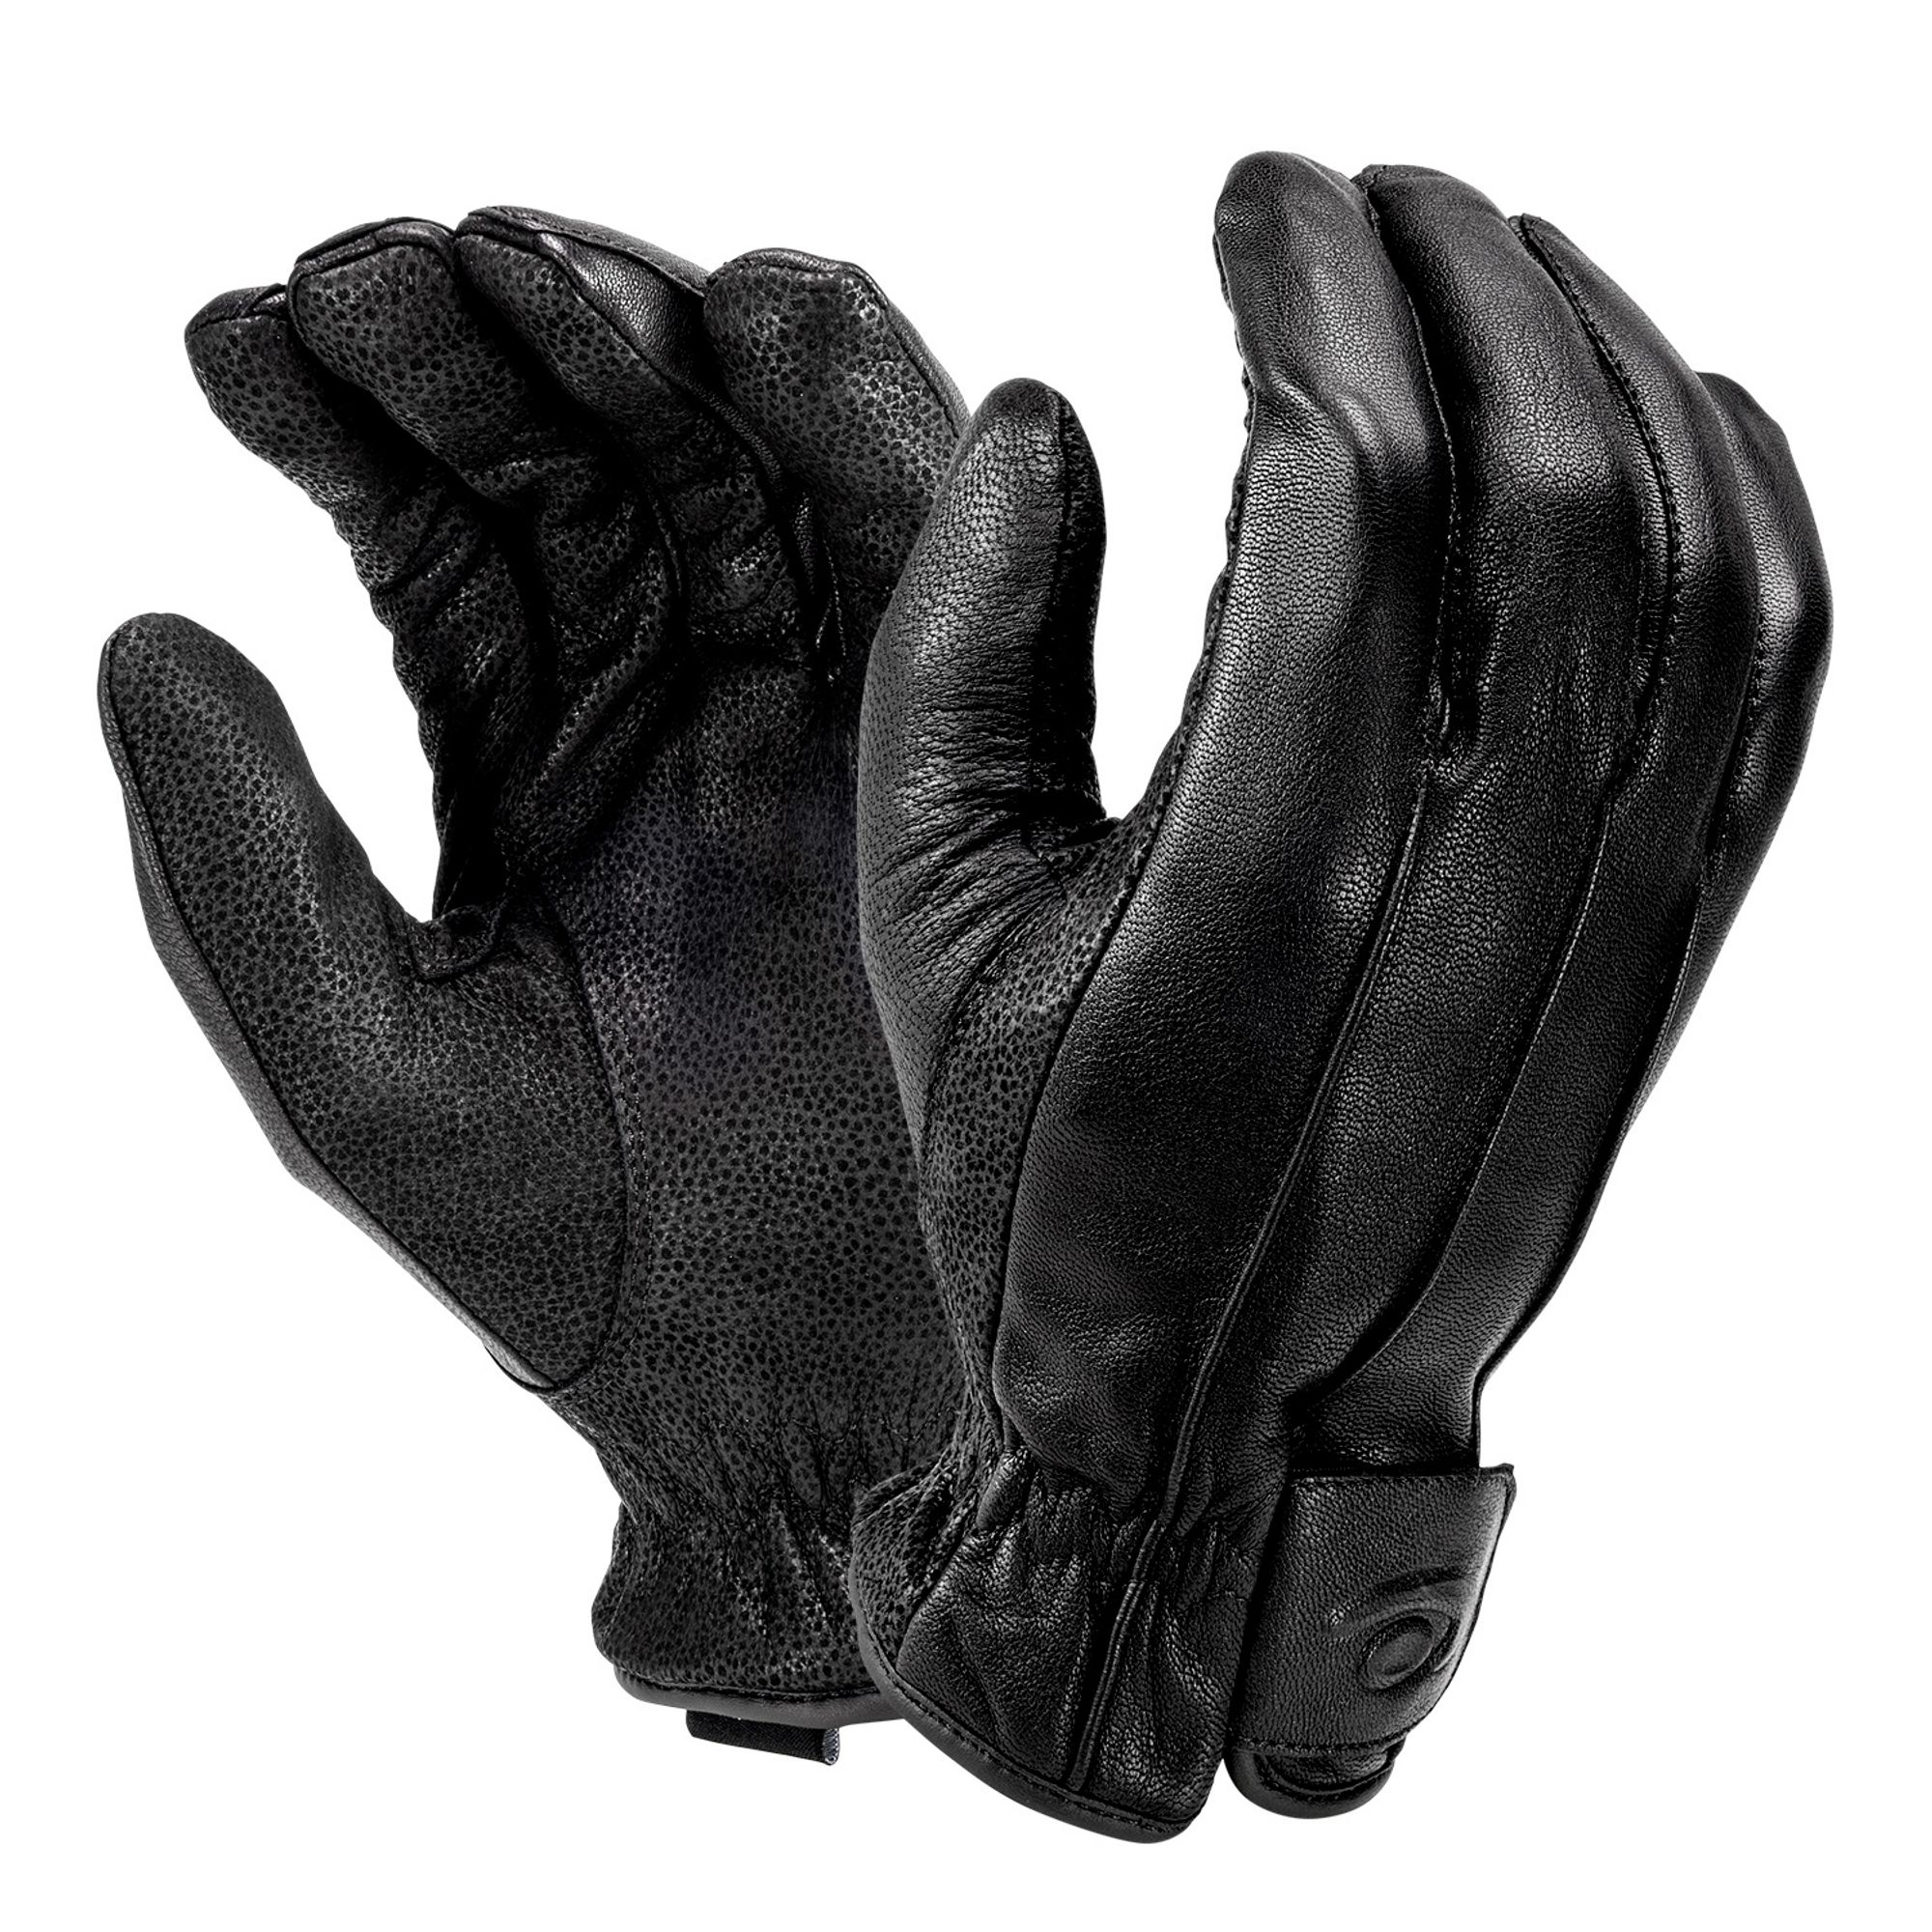 Leather Insulated Winter Patrol Glove - KRWPG100SM